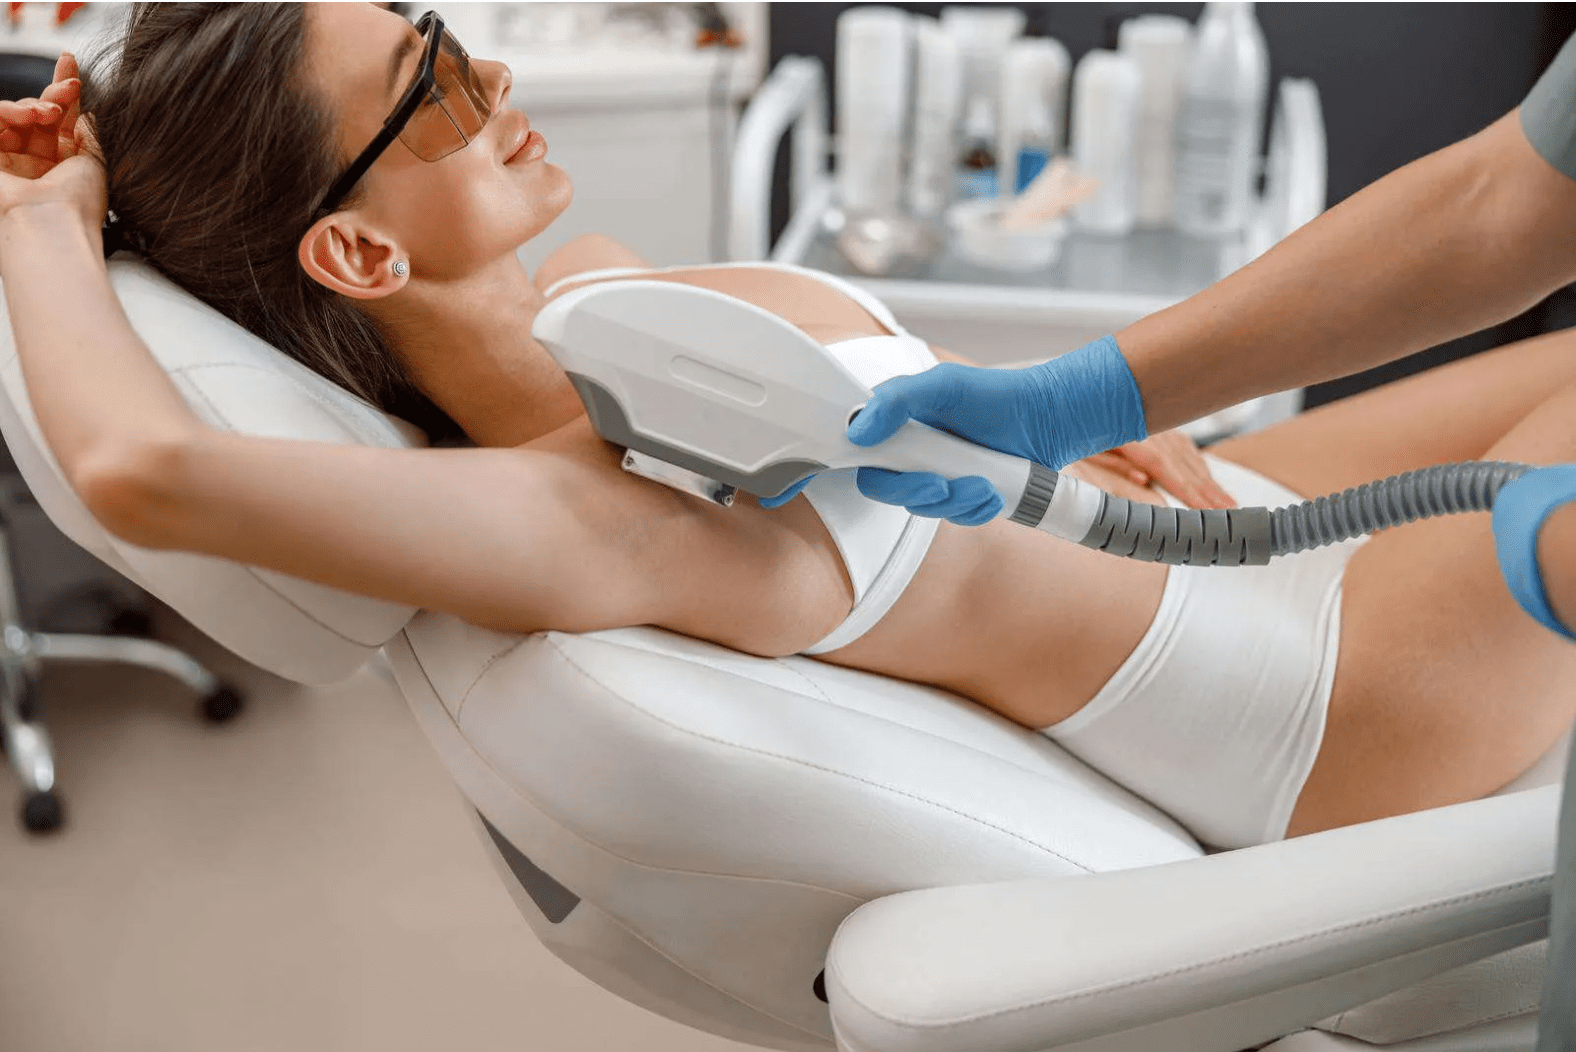 Woman receiving laser hair removal treatments